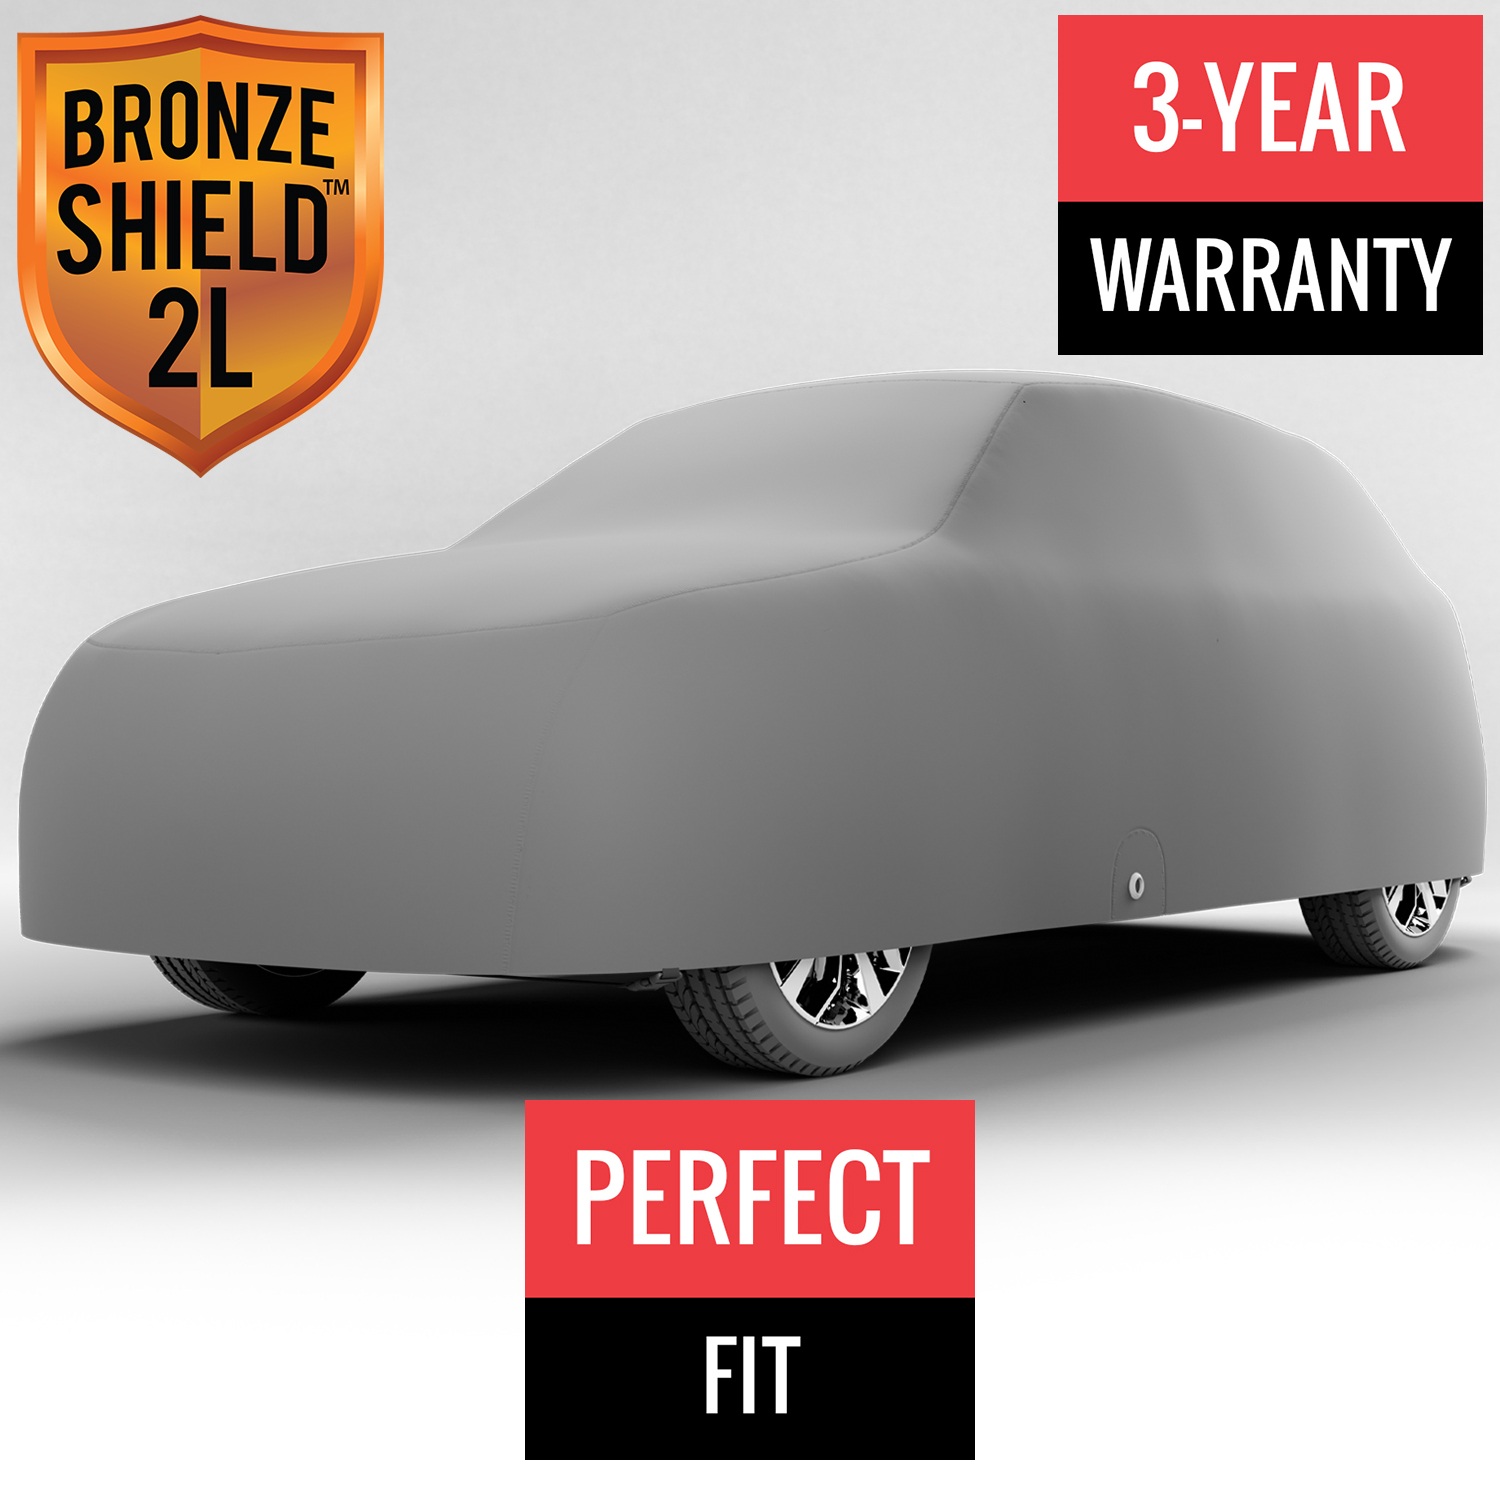 Bronze Shield 2L - Car Cover for Plymouth Voyager 2000 Van